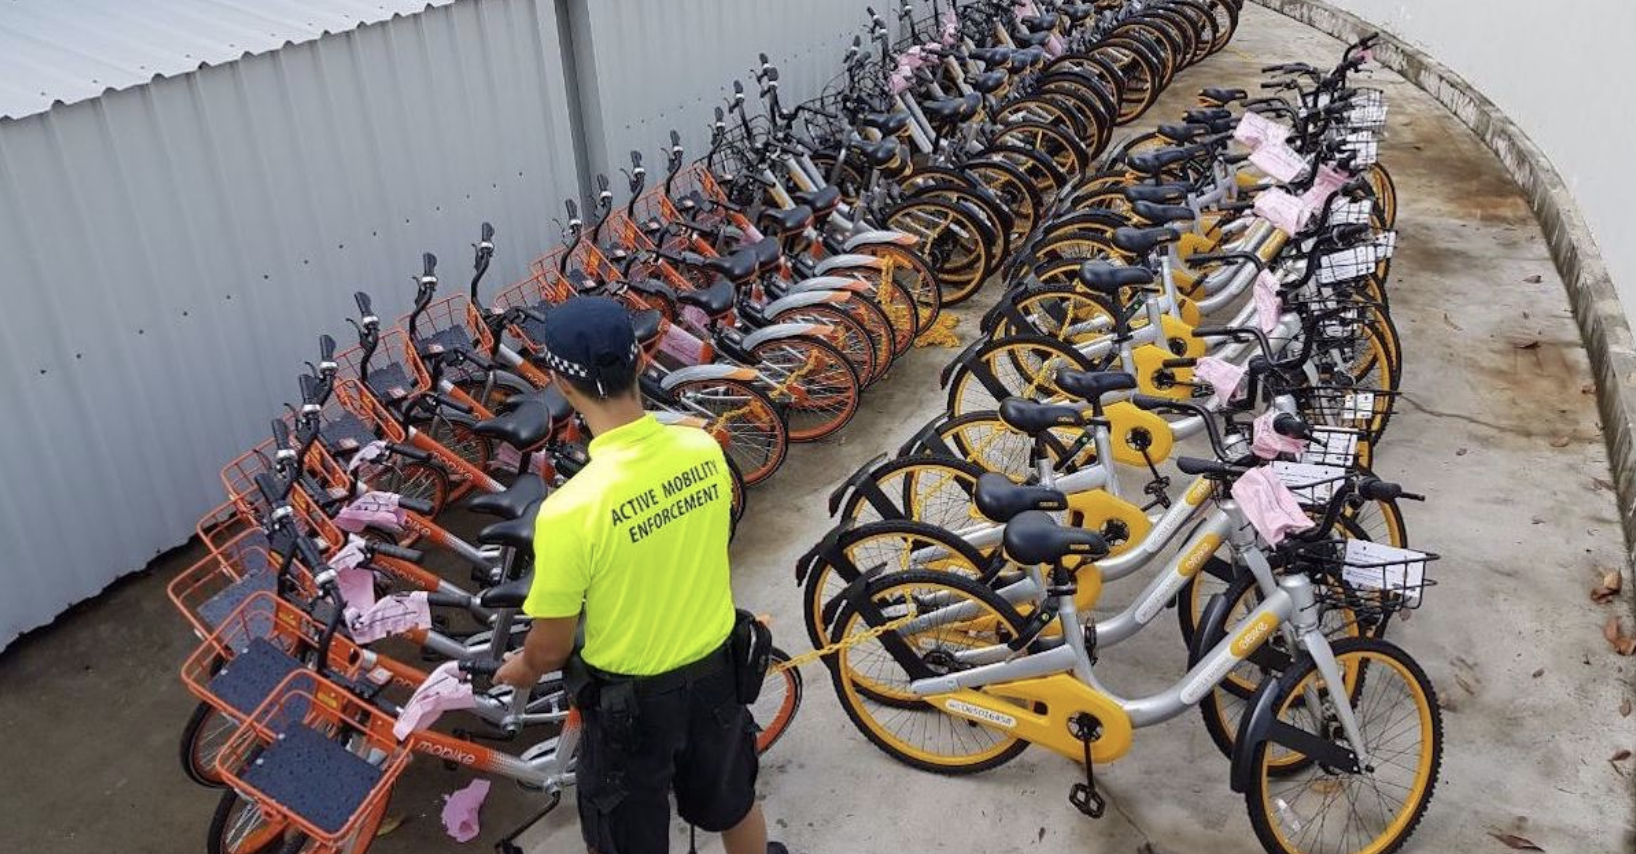 Singapore’s bike-sharing race heats up once again: What will it take to pedal to the top?